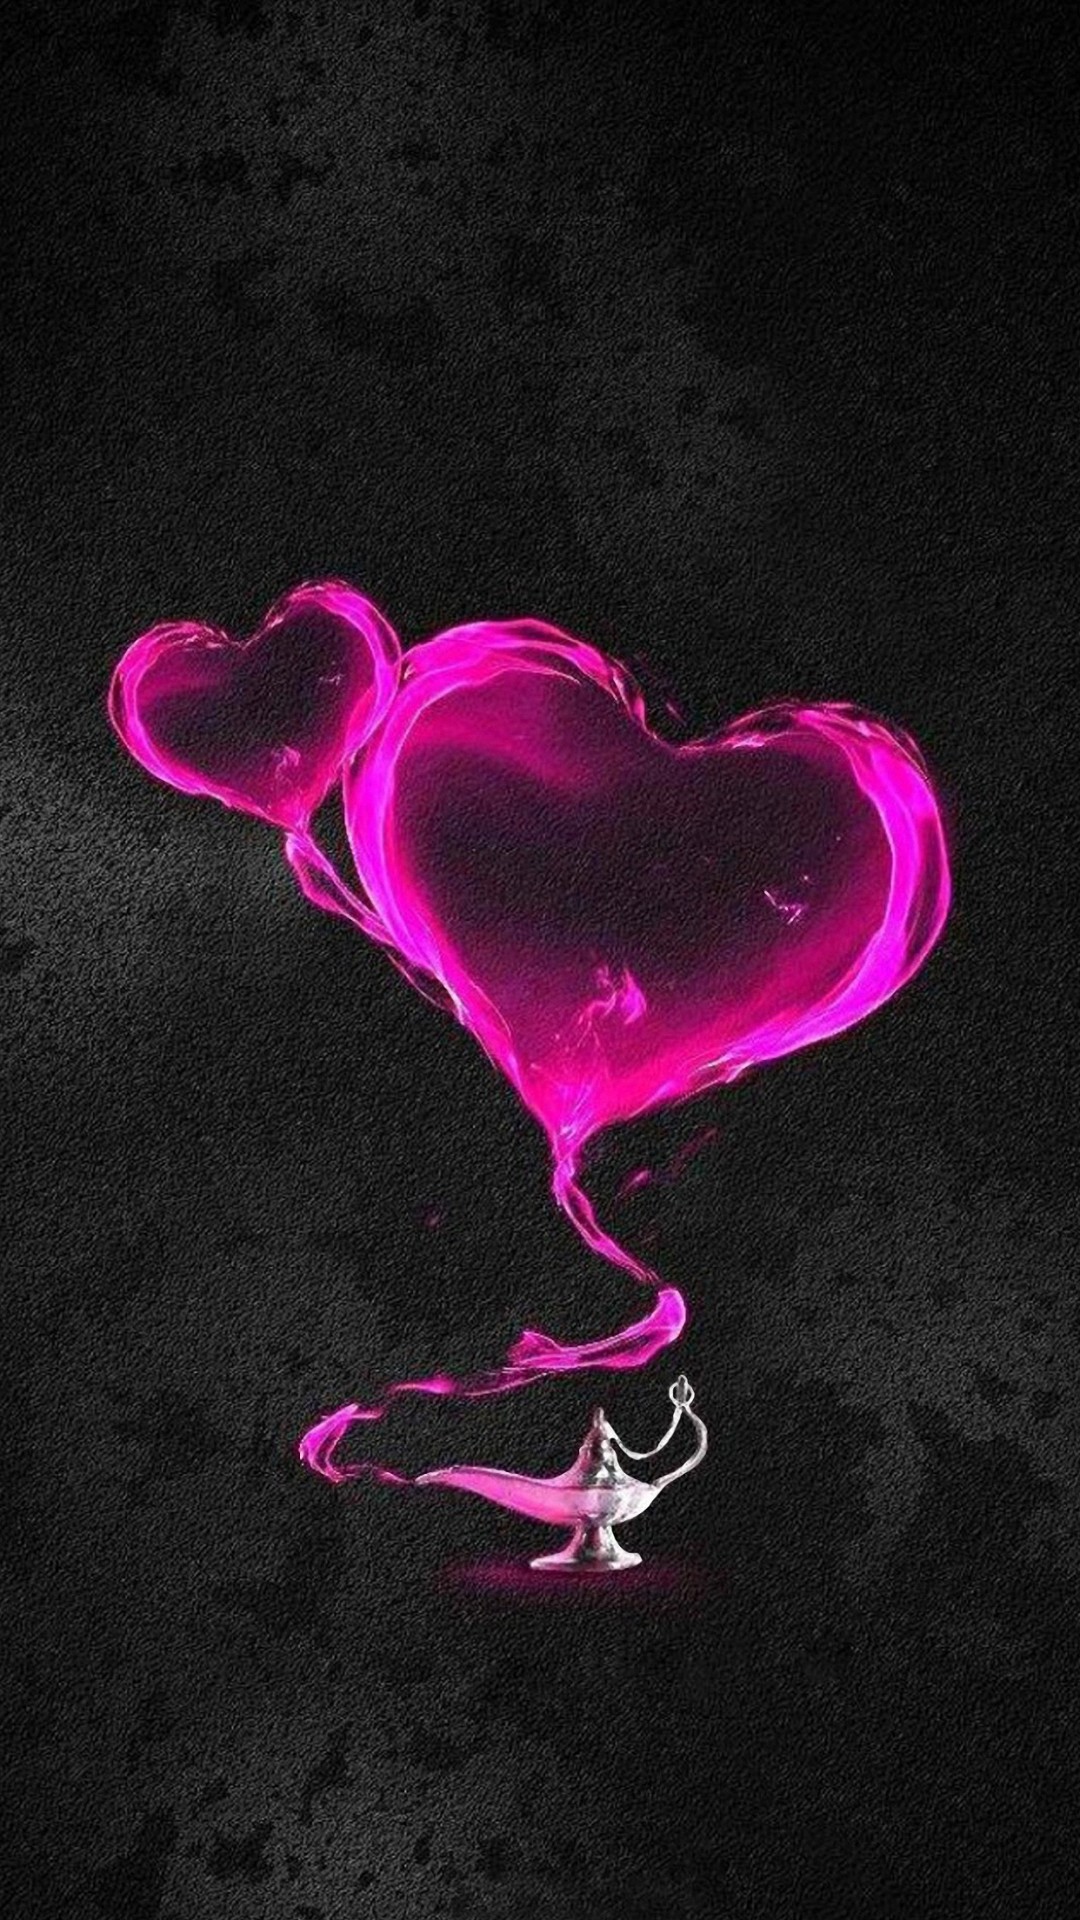 Heart Lamp Iphone Wallpapers